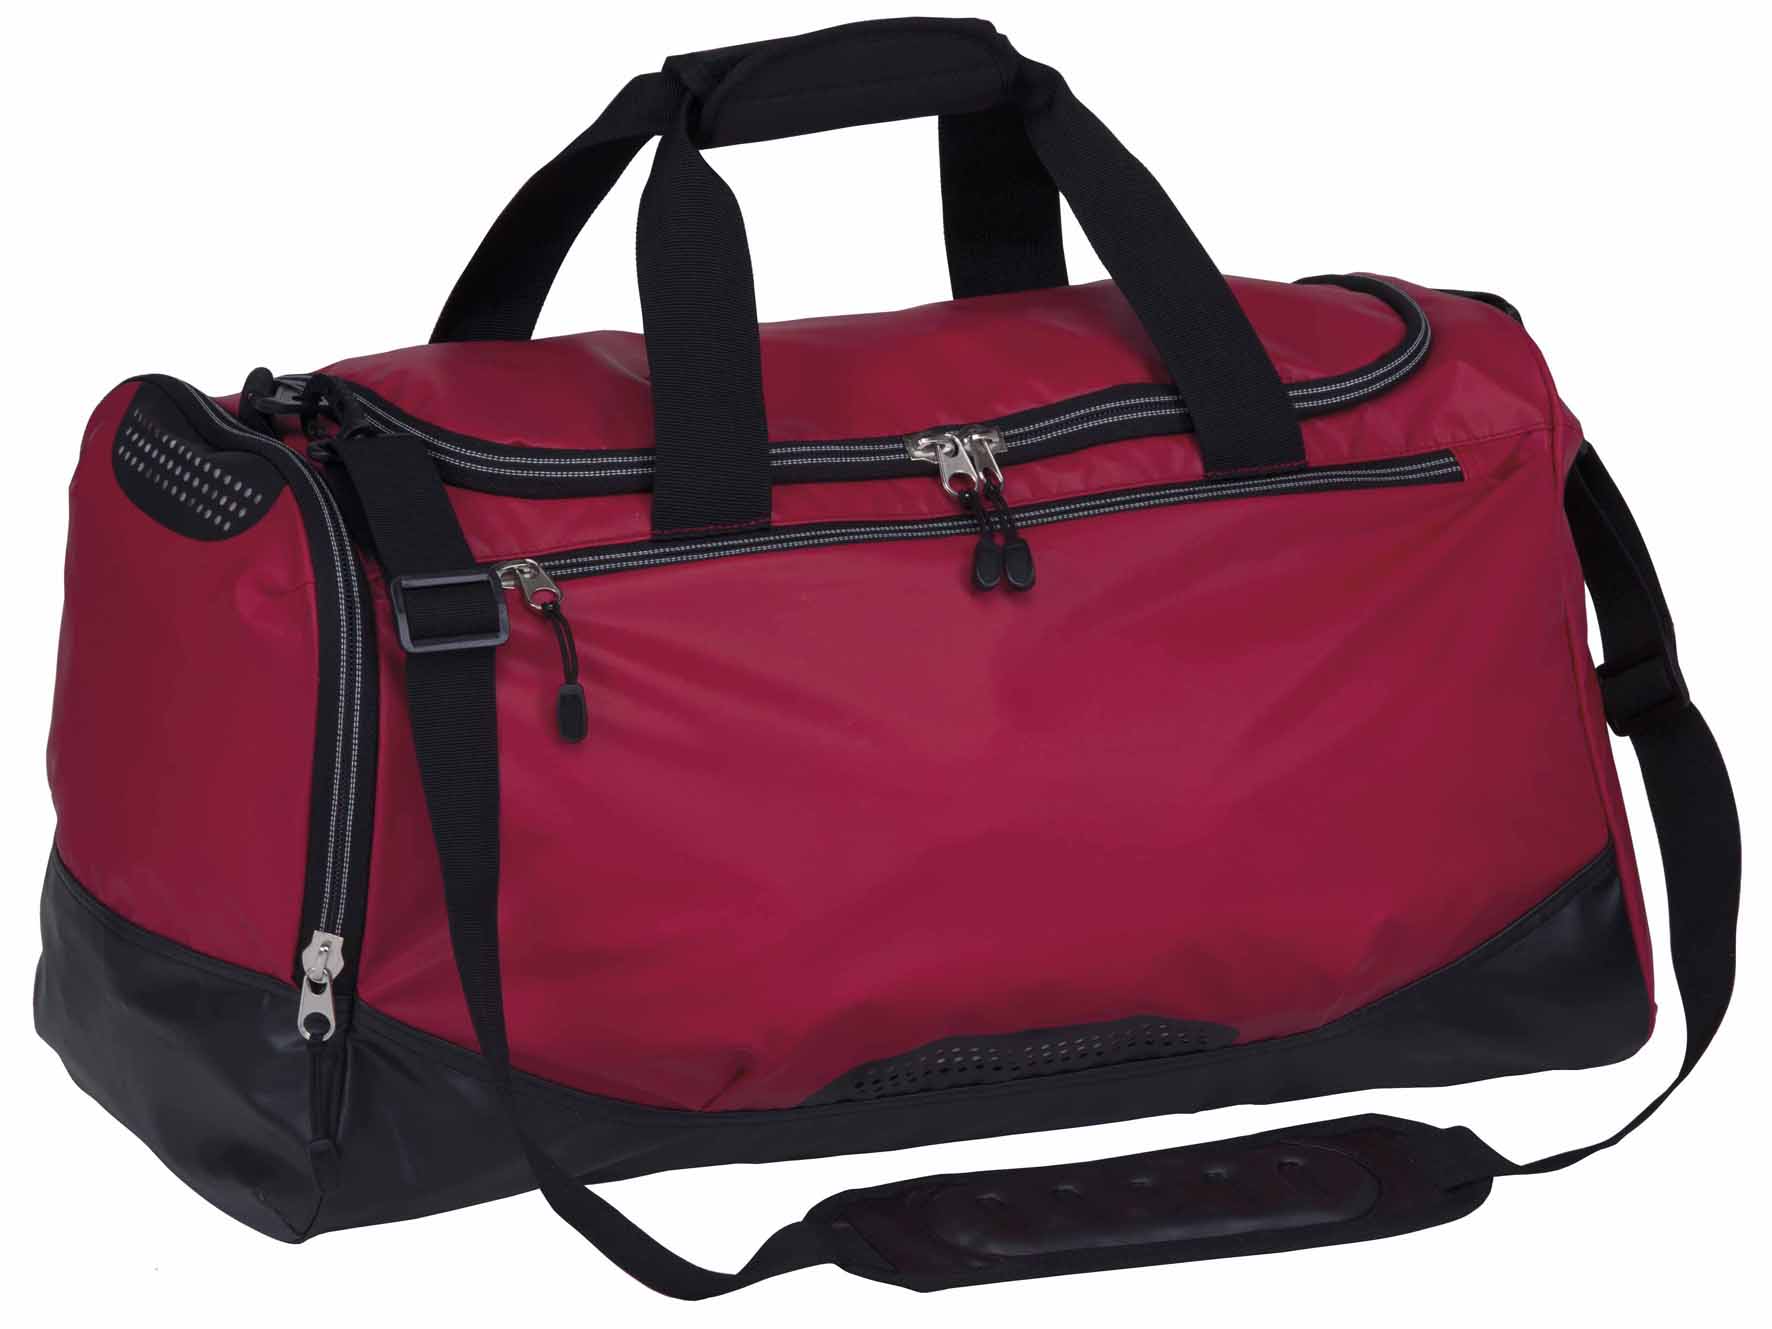 Hydrovent Sports Bag - Image Group